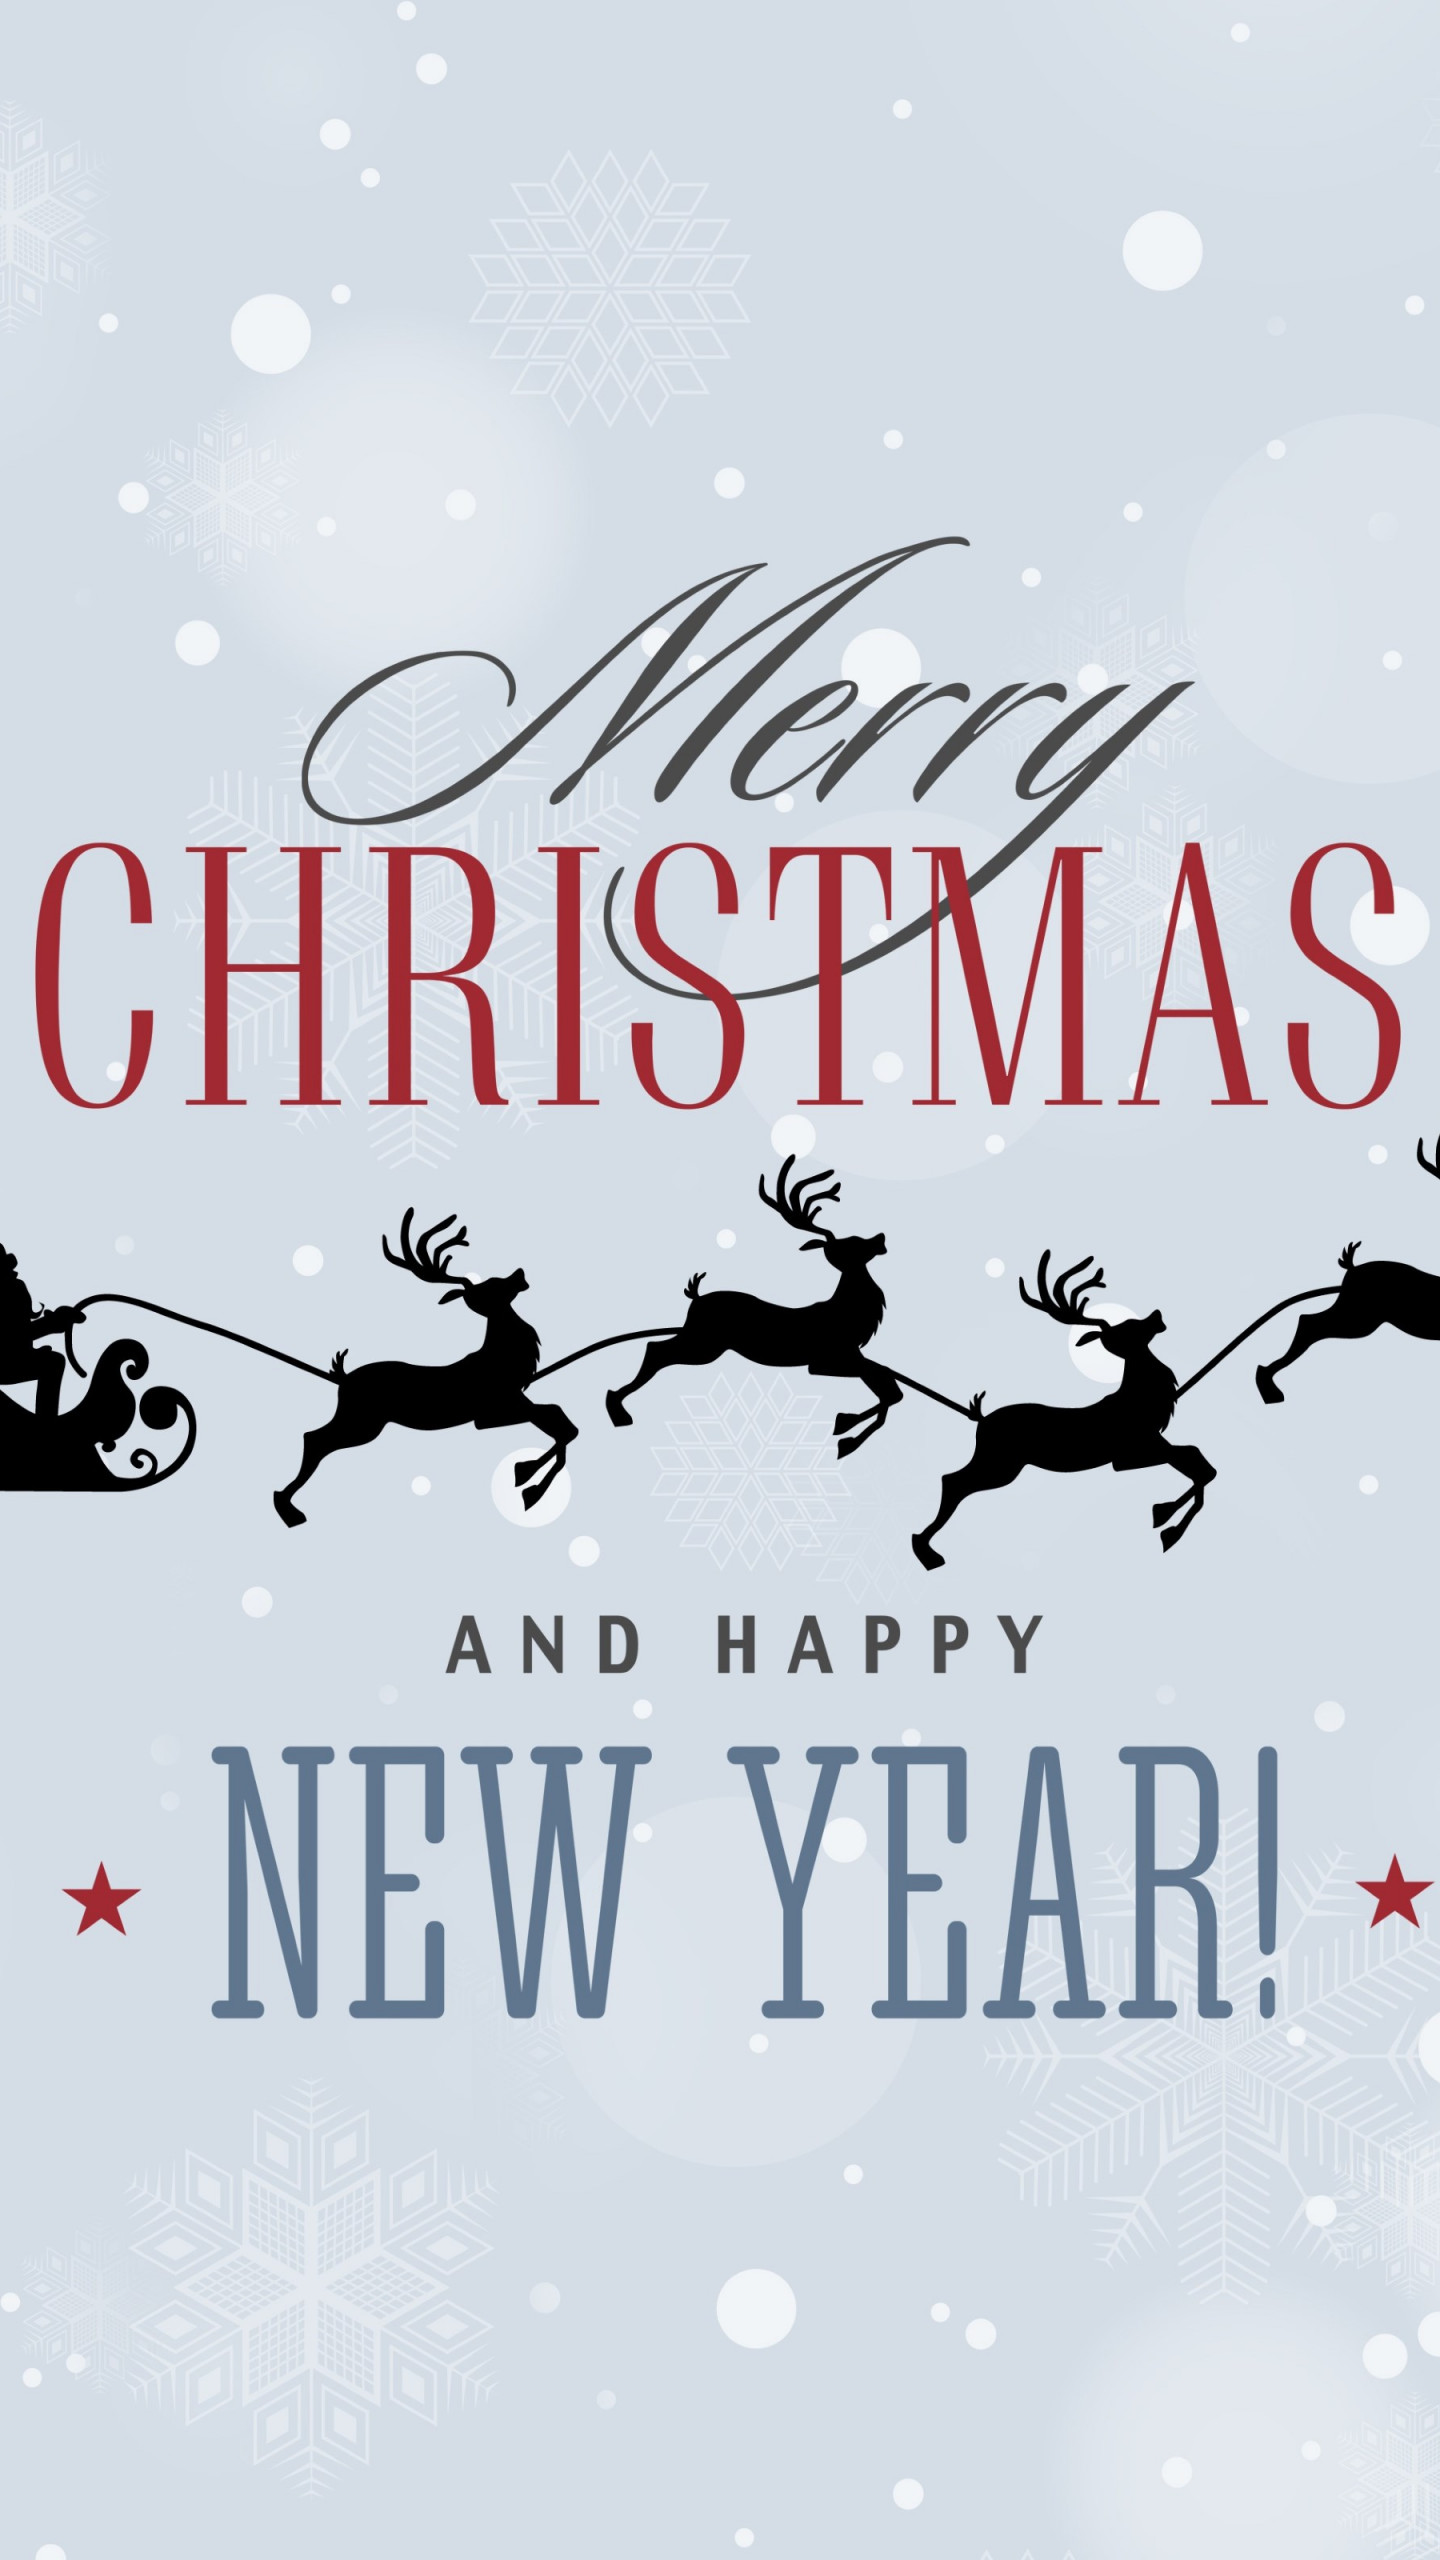 Merry Christmas and a Happy New Year wallpaper 1440x2560